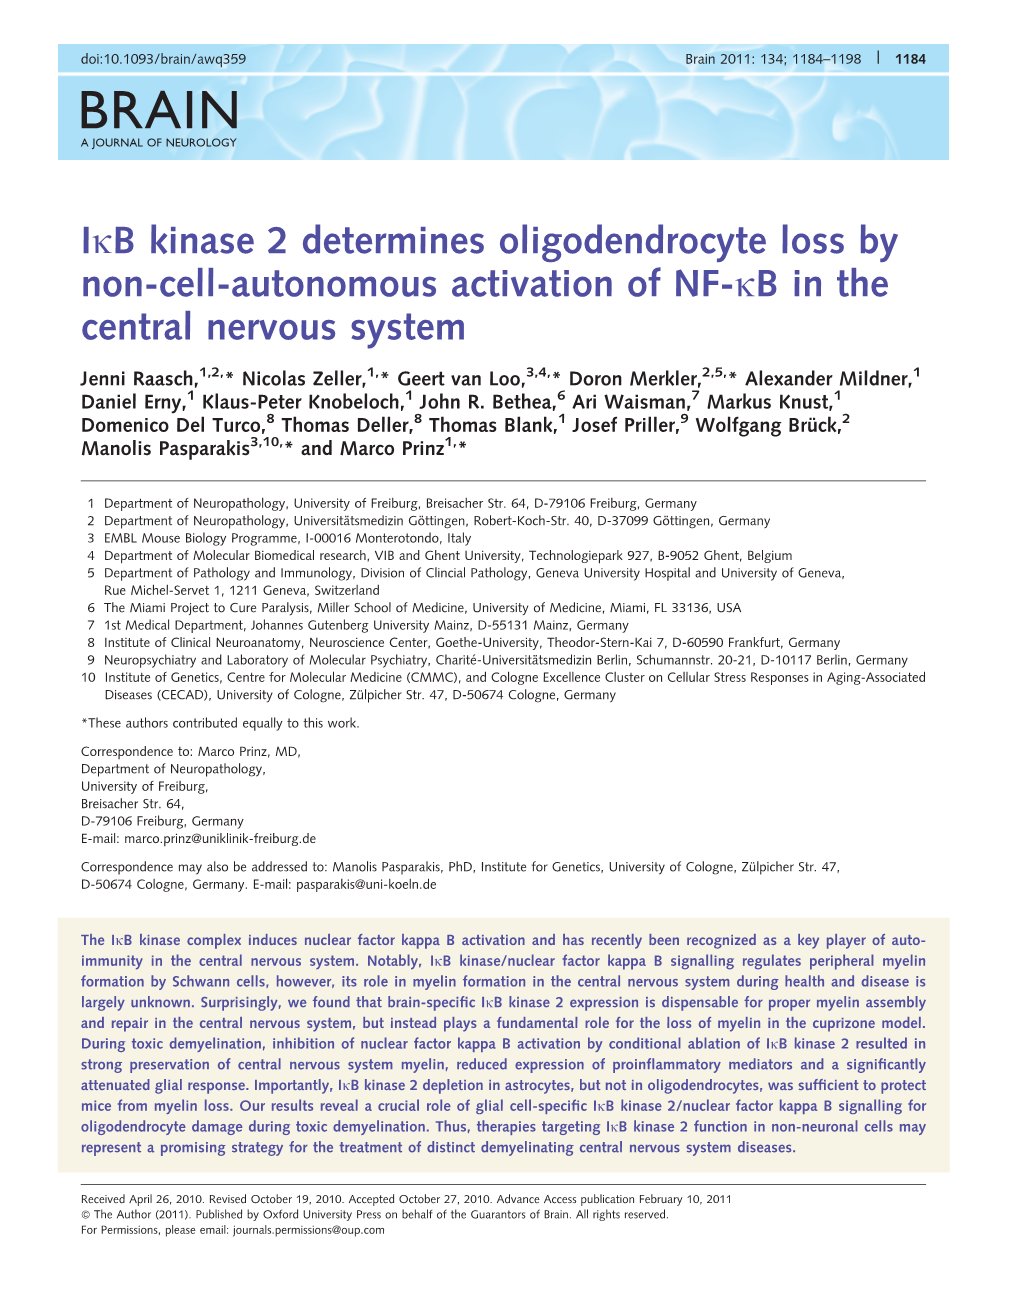 Ikb Kinase 2 Determines Oligodendrocyte Loss by Non-Cell-Autonomous Activation of NF-Kb in the Central Nervous System